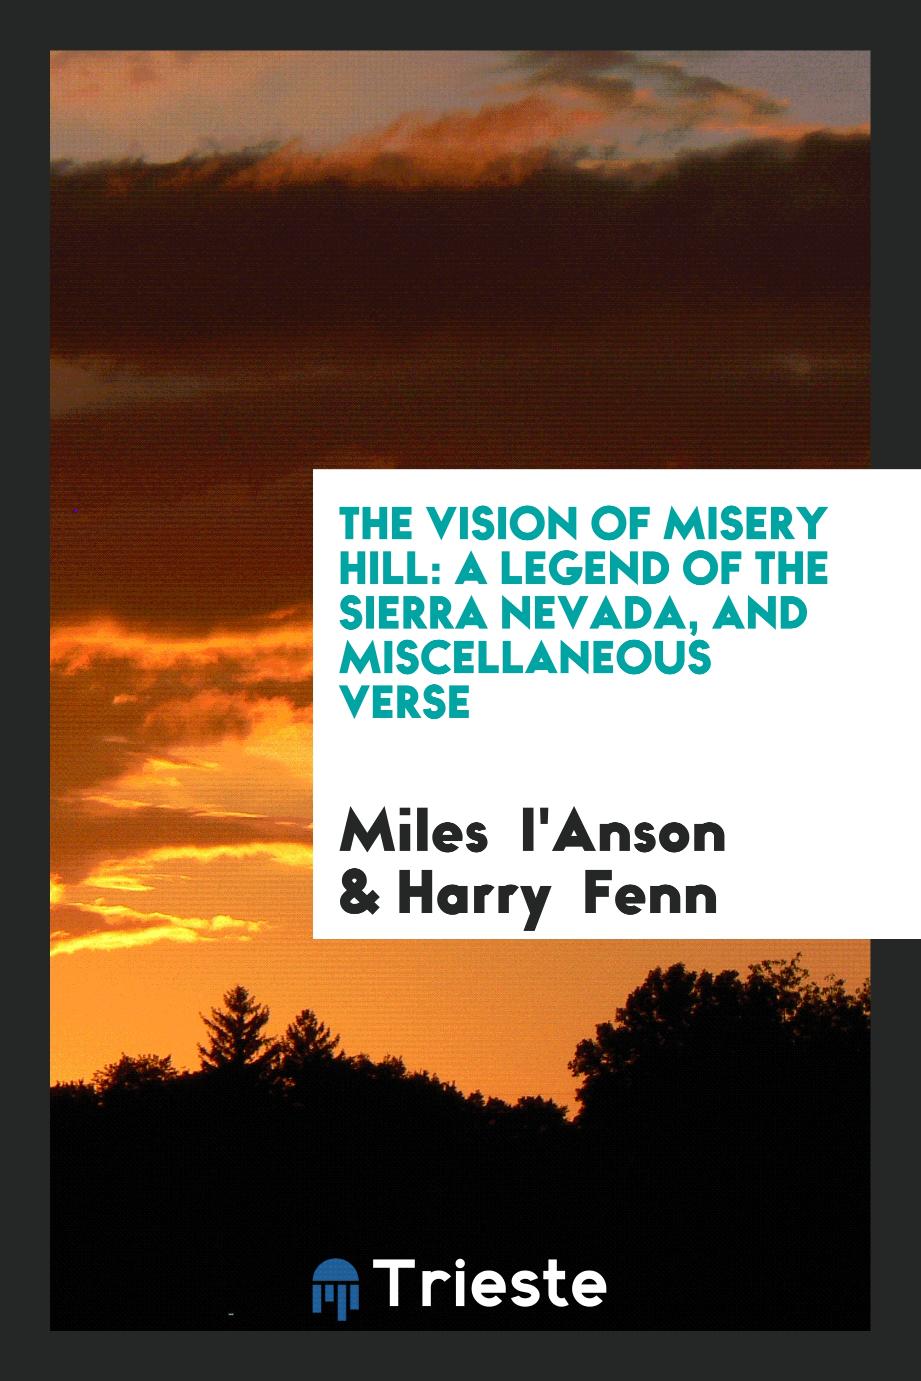 The Vision of Misery Hill: A Legend of the Sierra Nevada, and Miscellaneous Verse